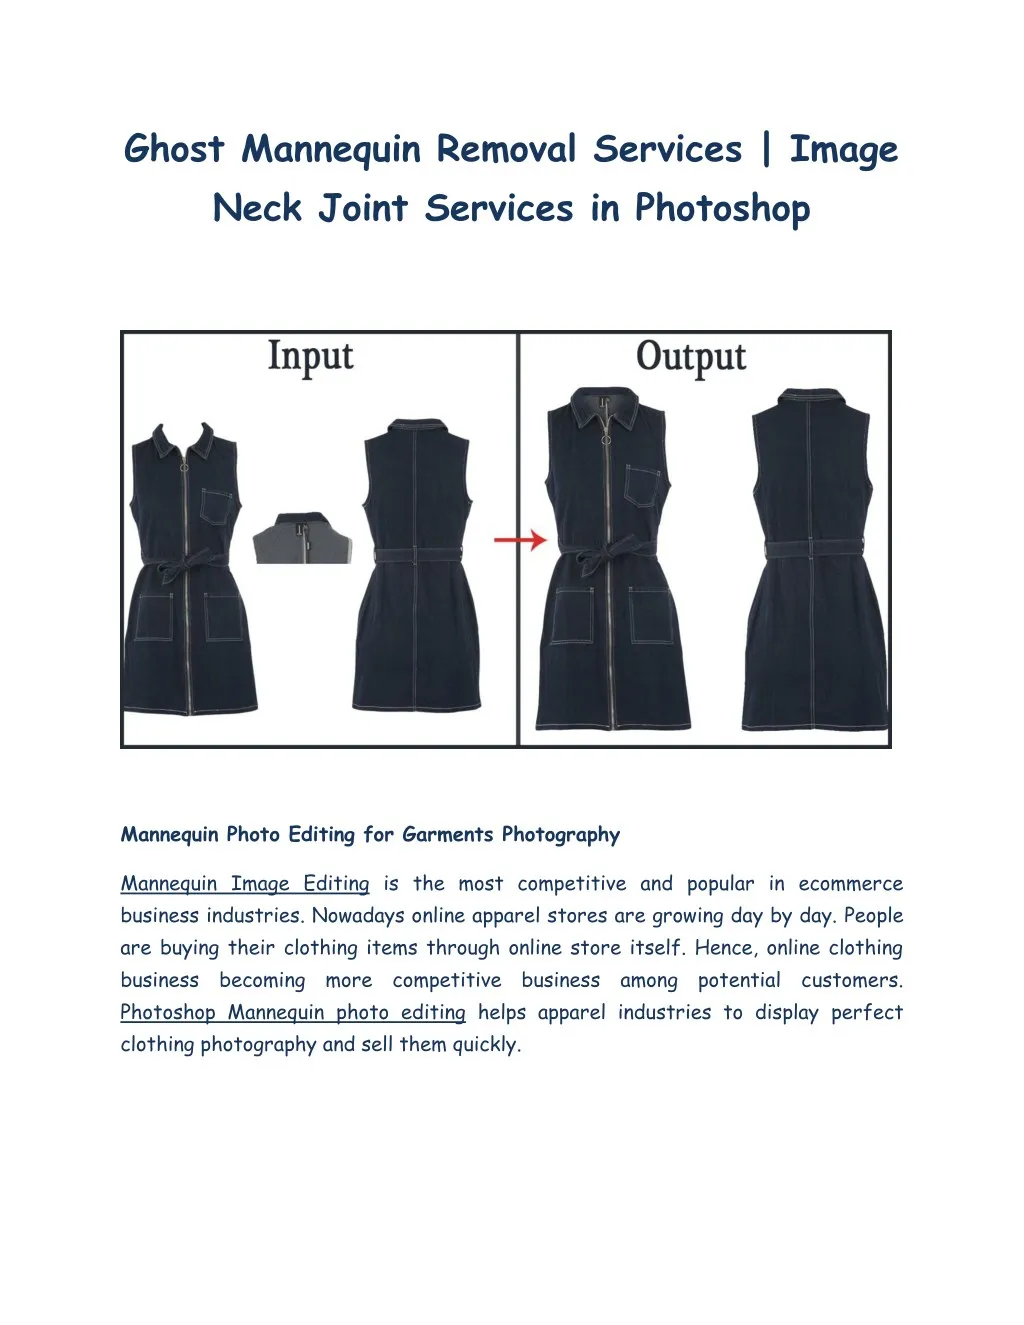 ghost mannequin removal services image neck joint